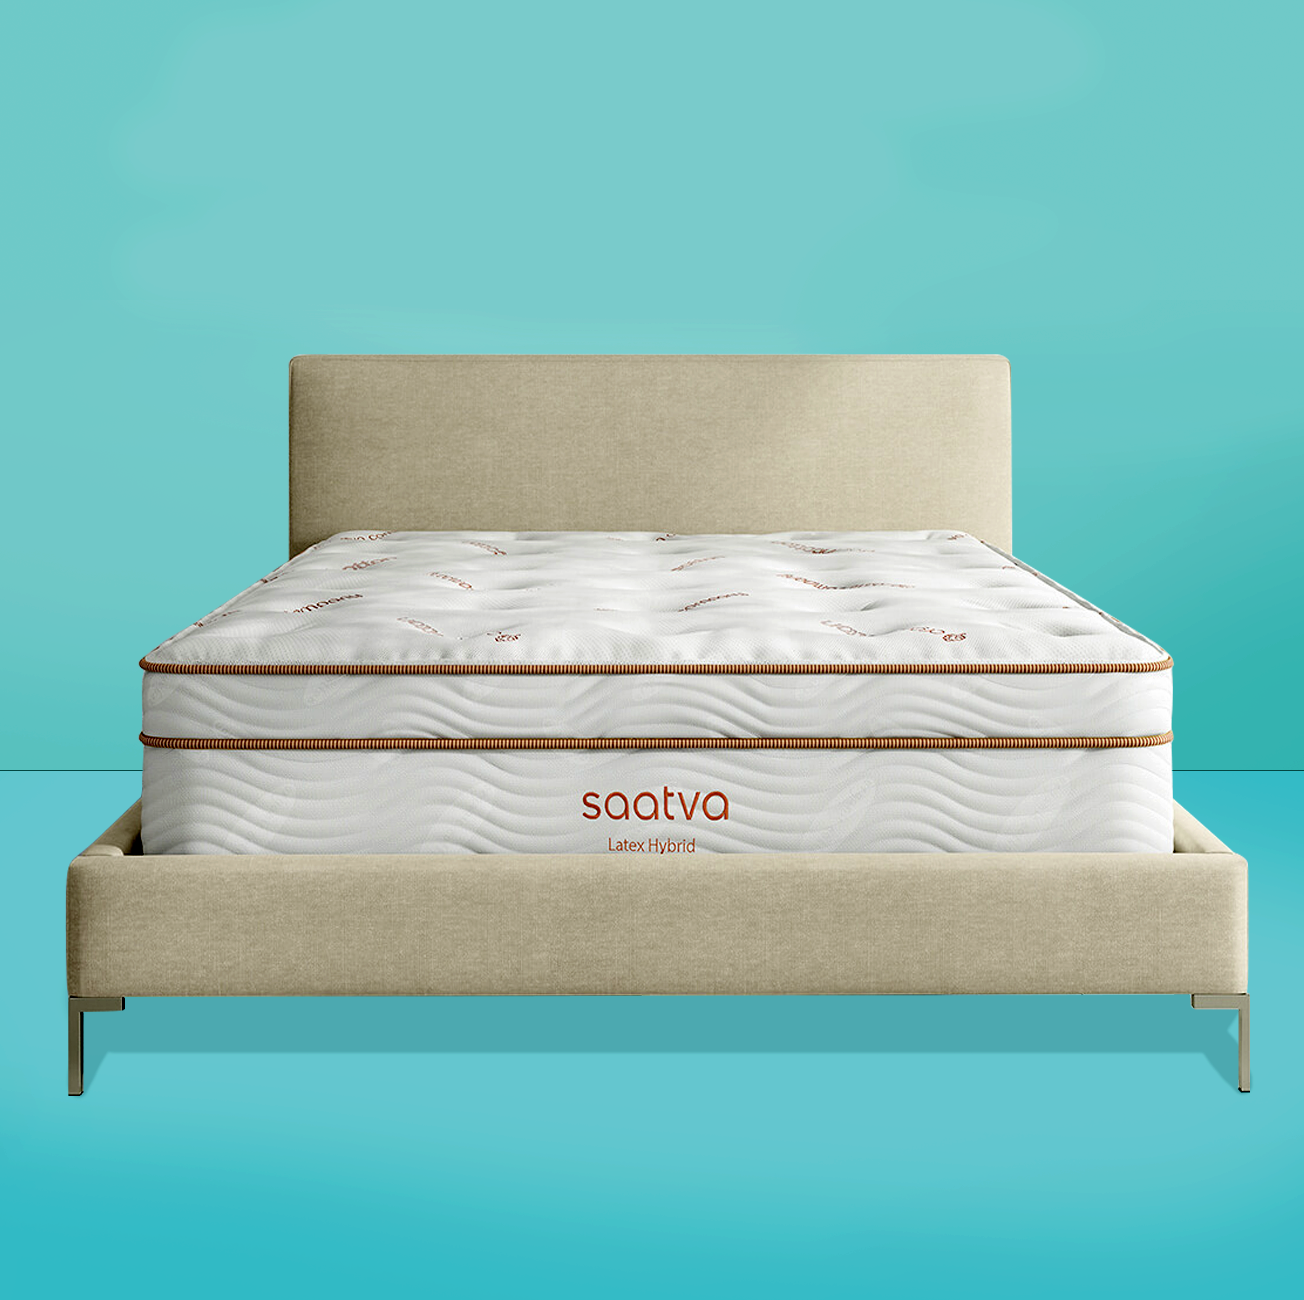 13 Best Mattresses That'll Have You Sleeping Like a Baby